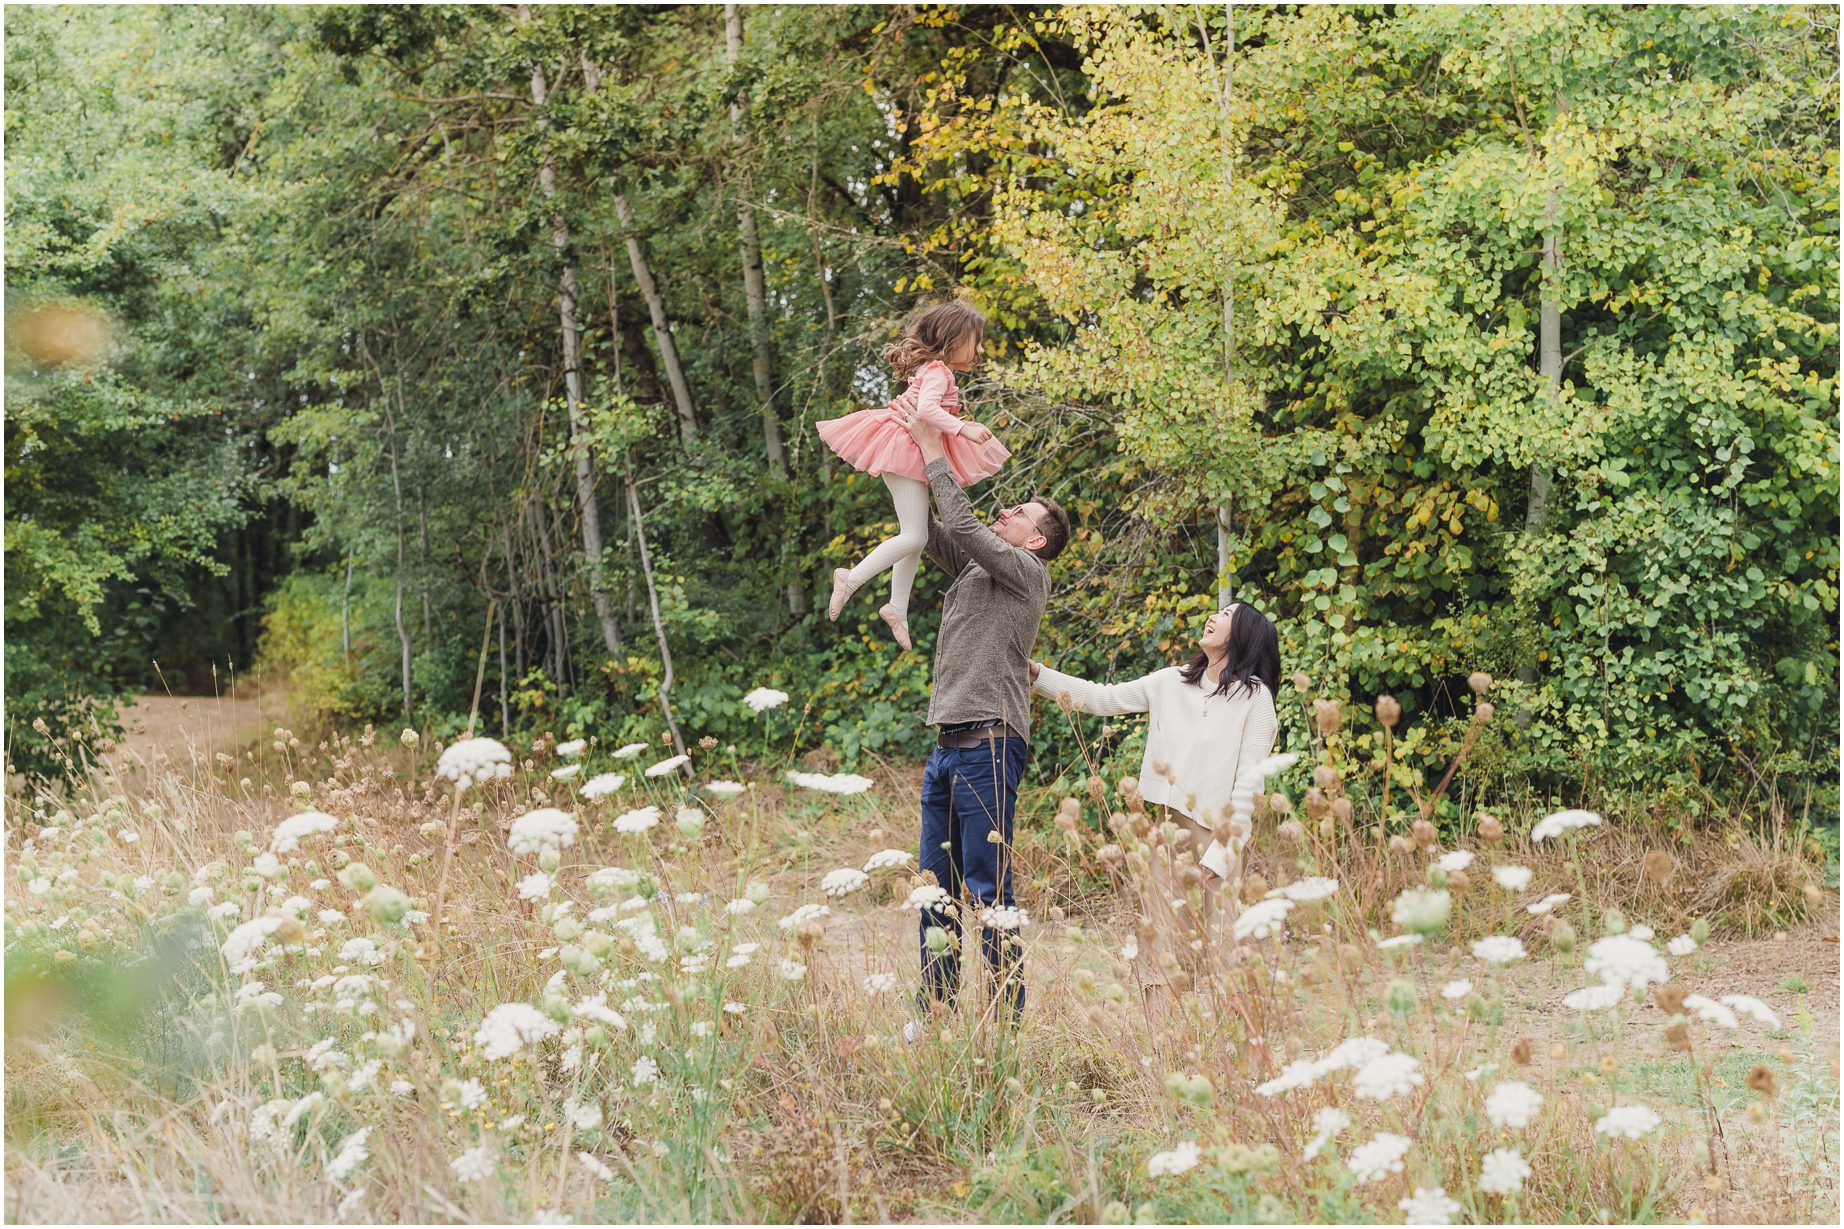 Tigard Family Photographer takes photographs of a family as a father lifts his daughter over queen Anne's lace